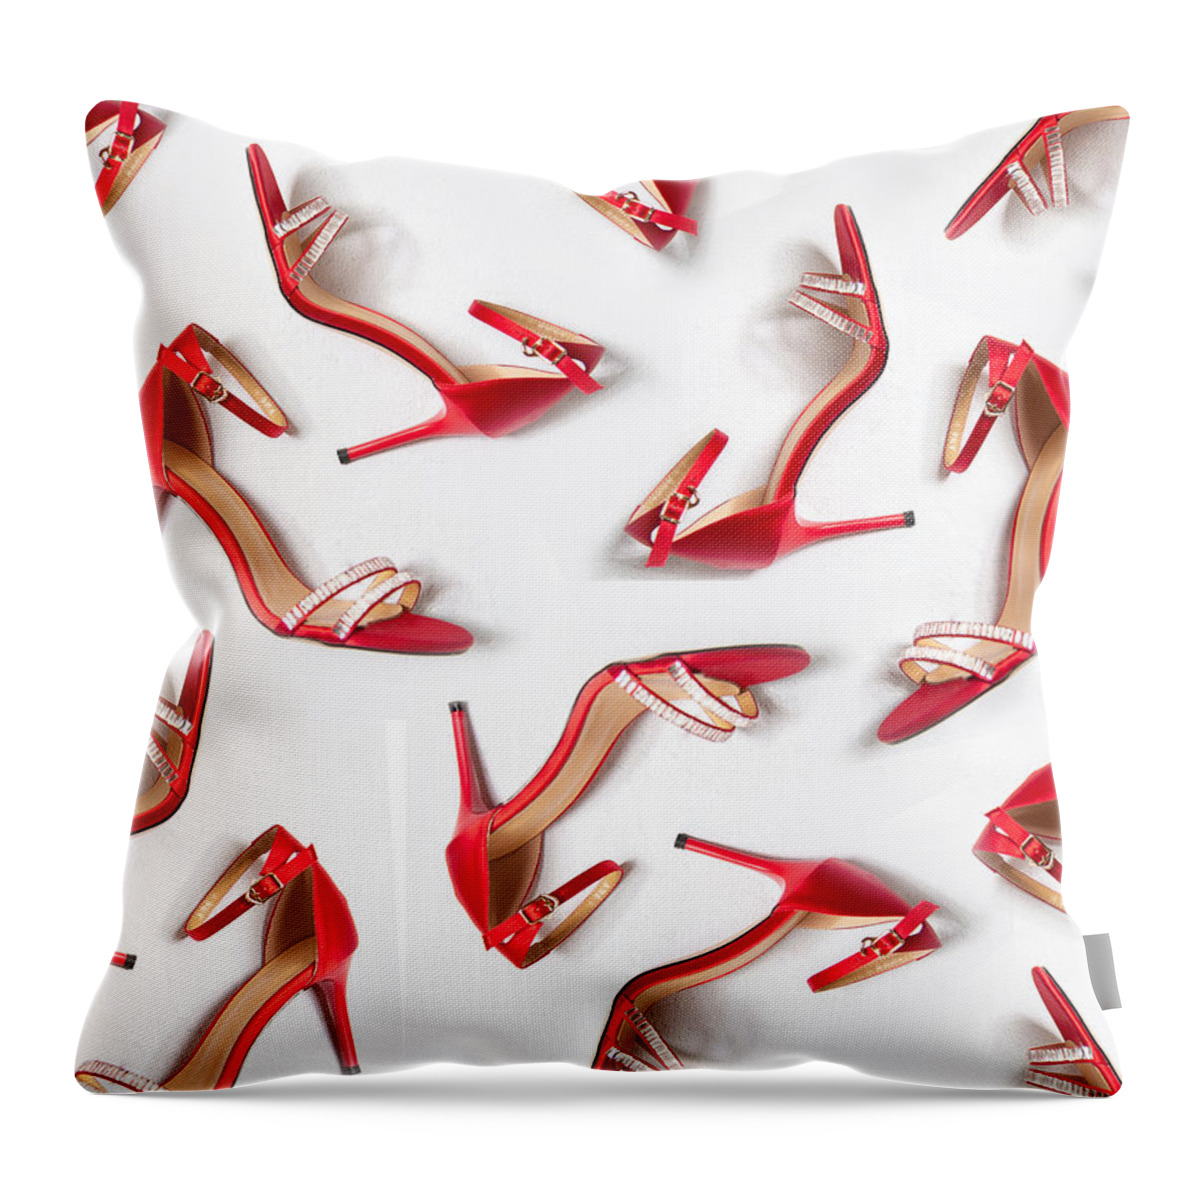 Face Mask Throw Pillow featuring the digital art Red Shoes Diaries Face Mask by Theresa Tahara